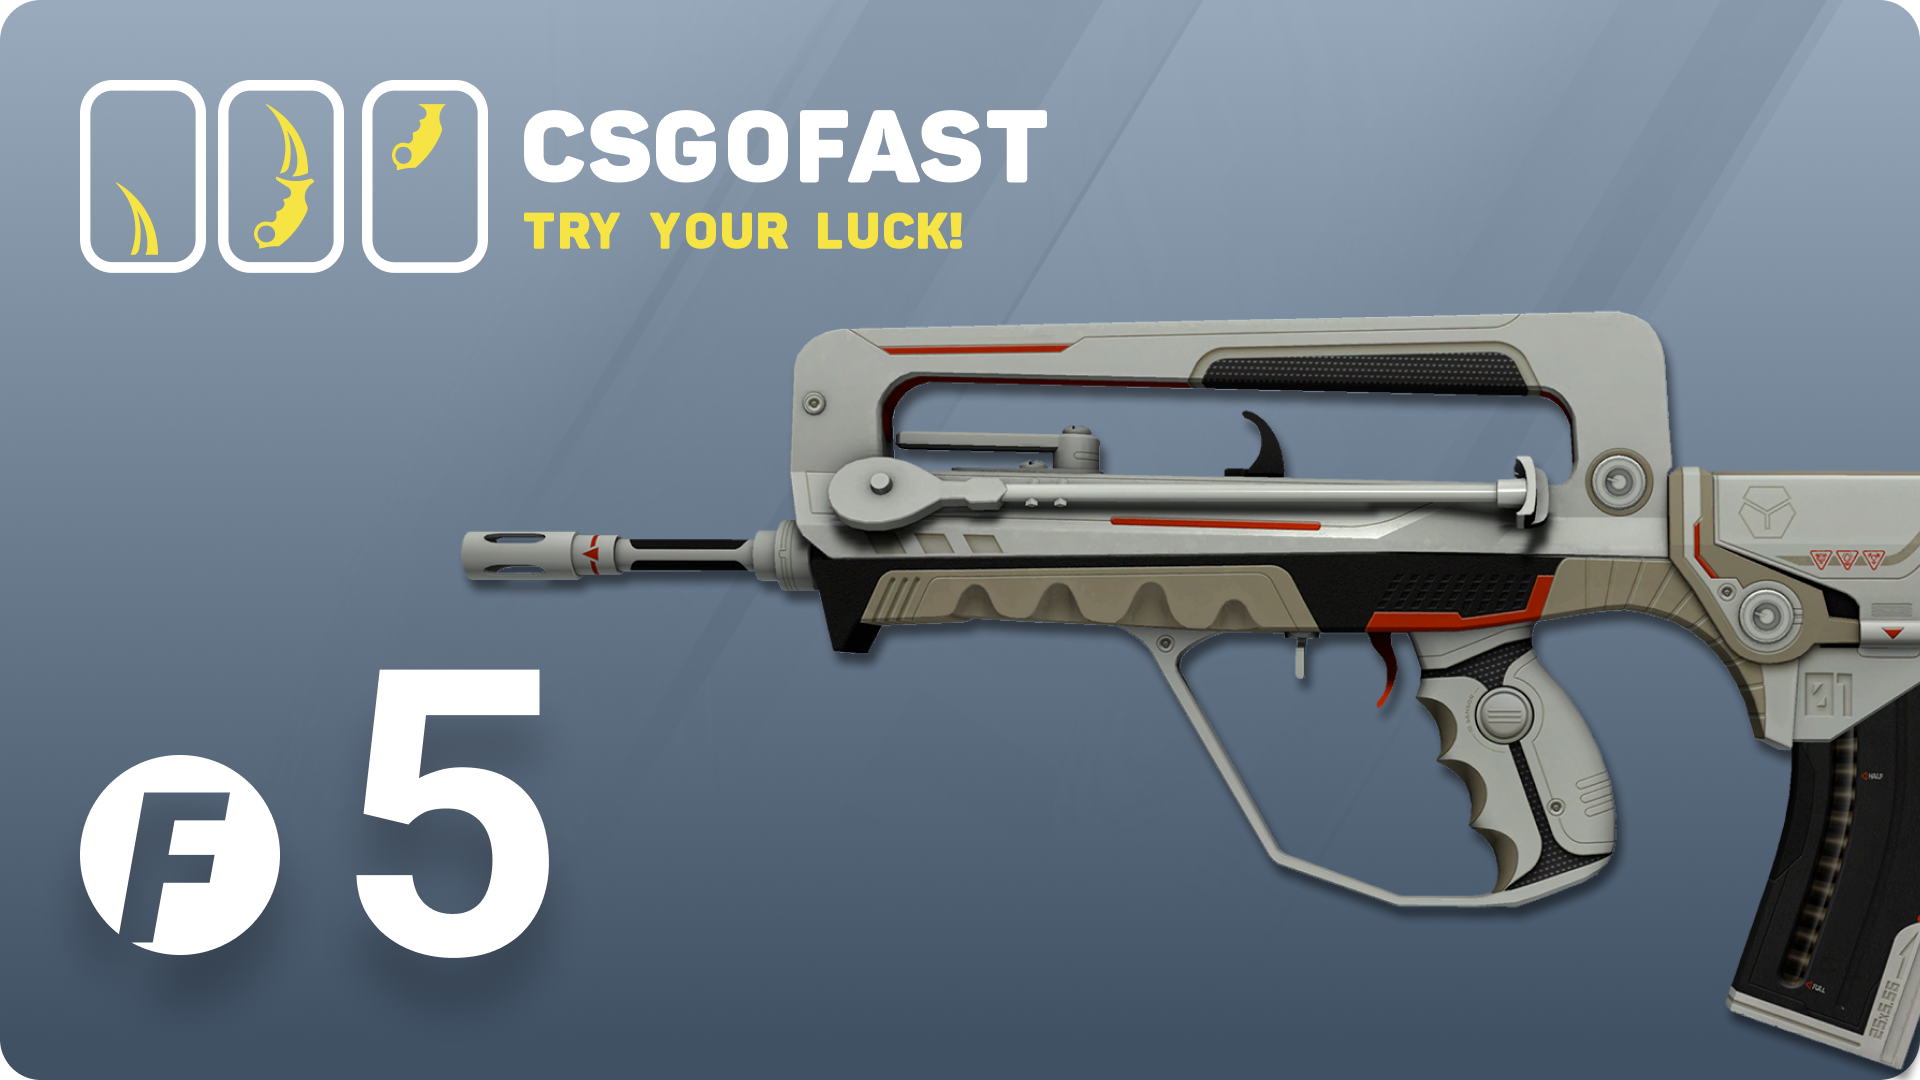 CSGOFAST 5 Fast Coins Gift Card $3.63